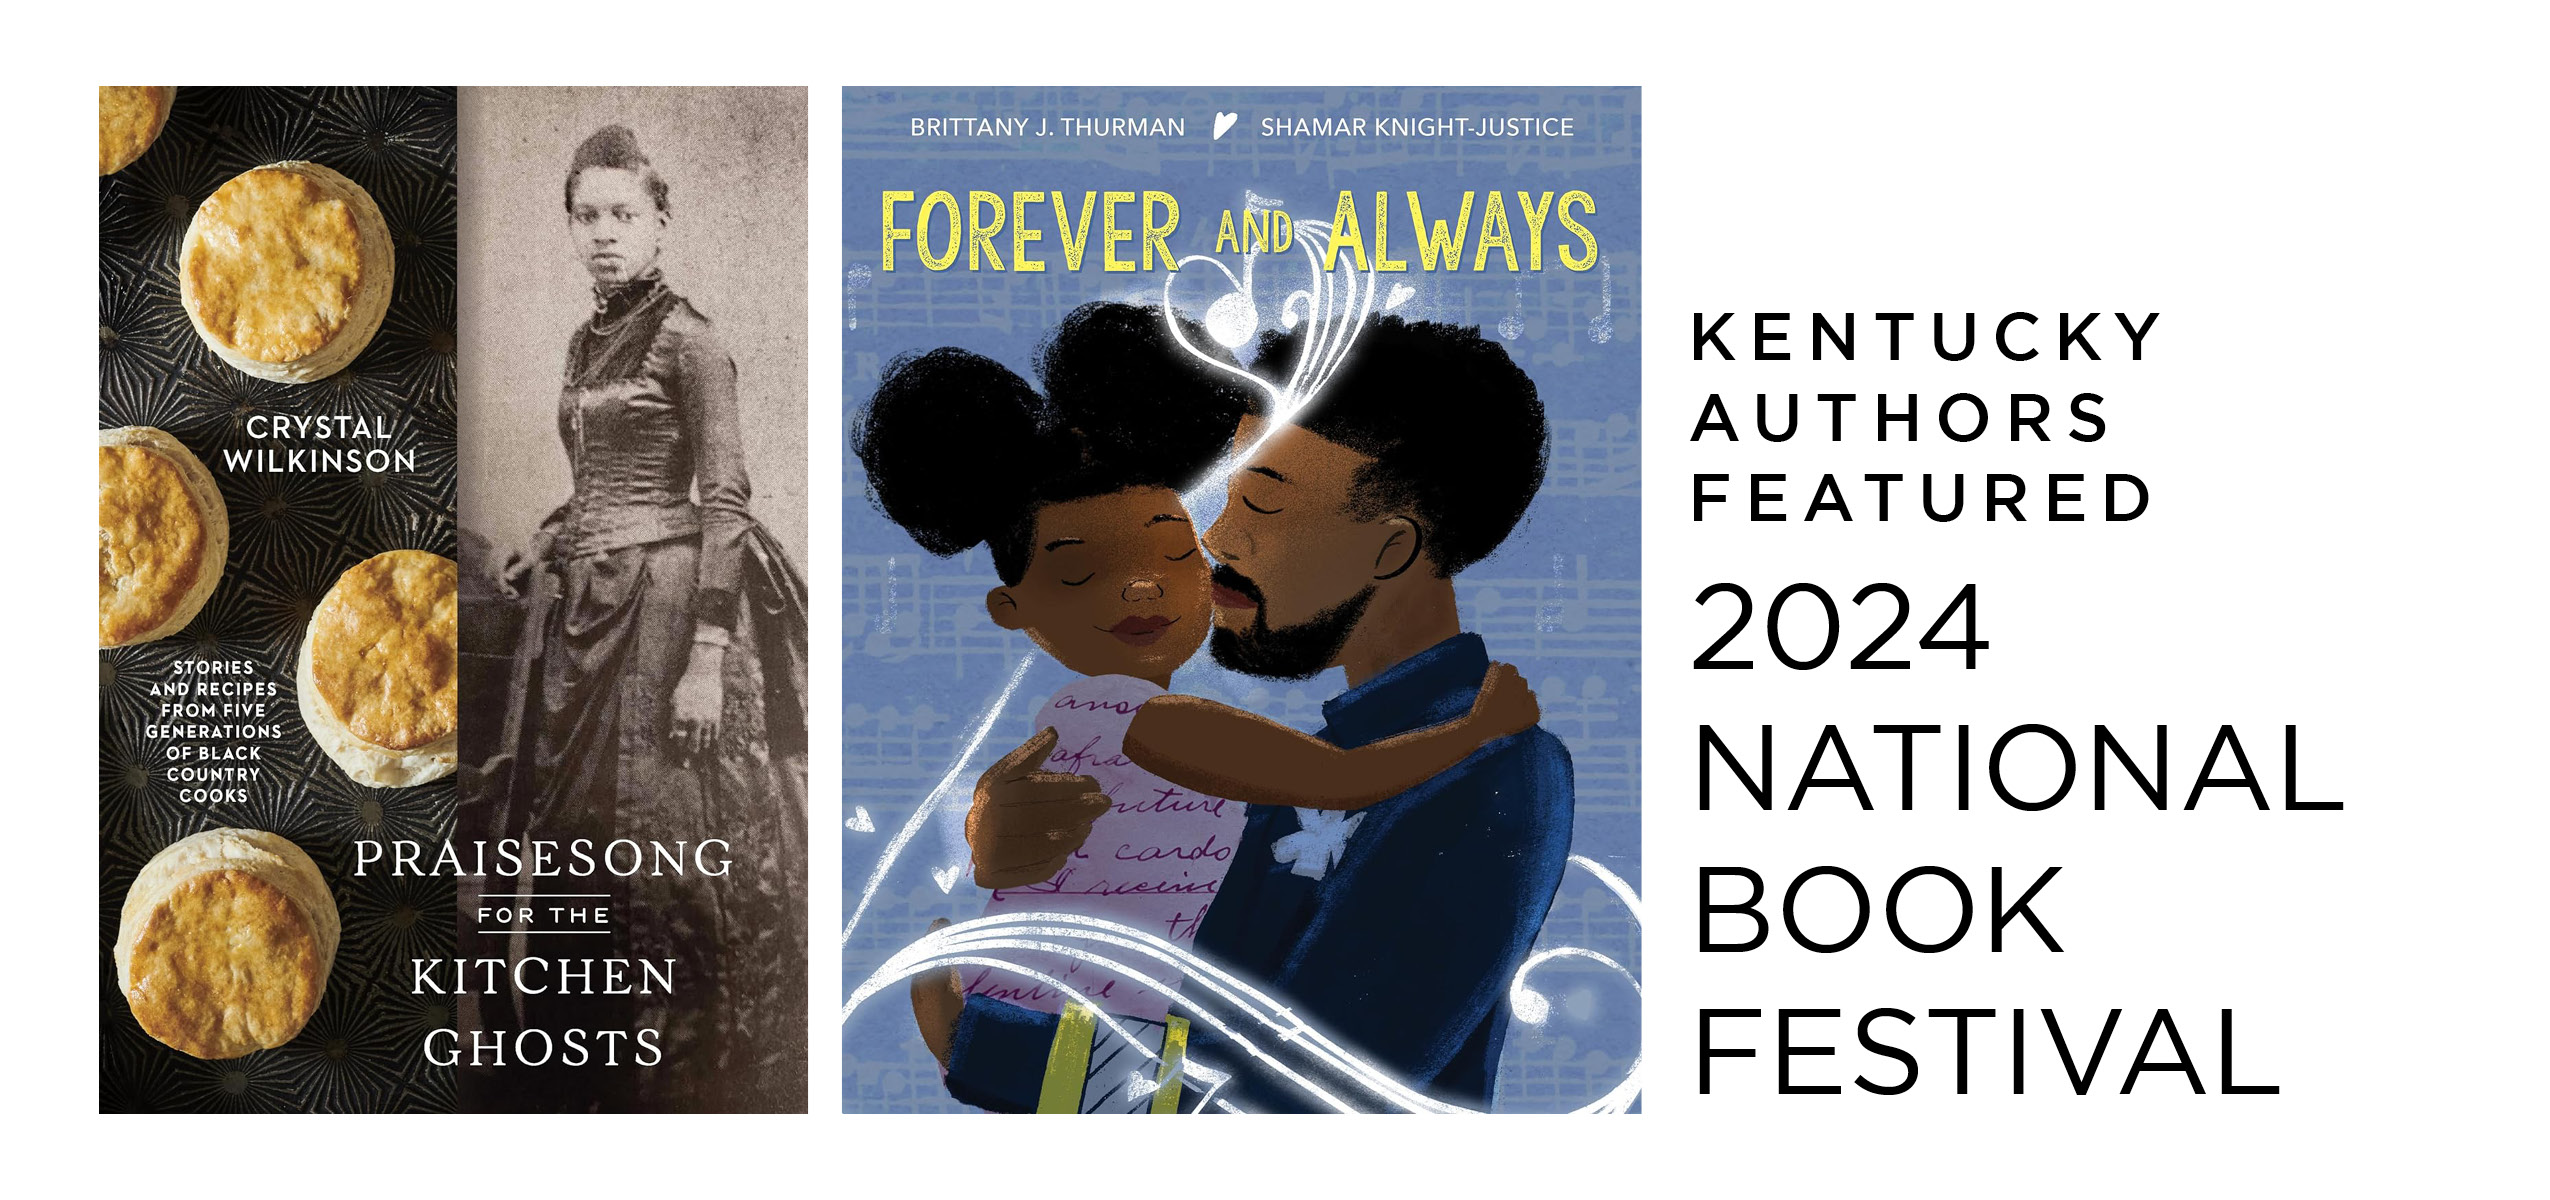 Kentucky Authors Chosen for the 2024 National Book Festival in Washington, D.C.